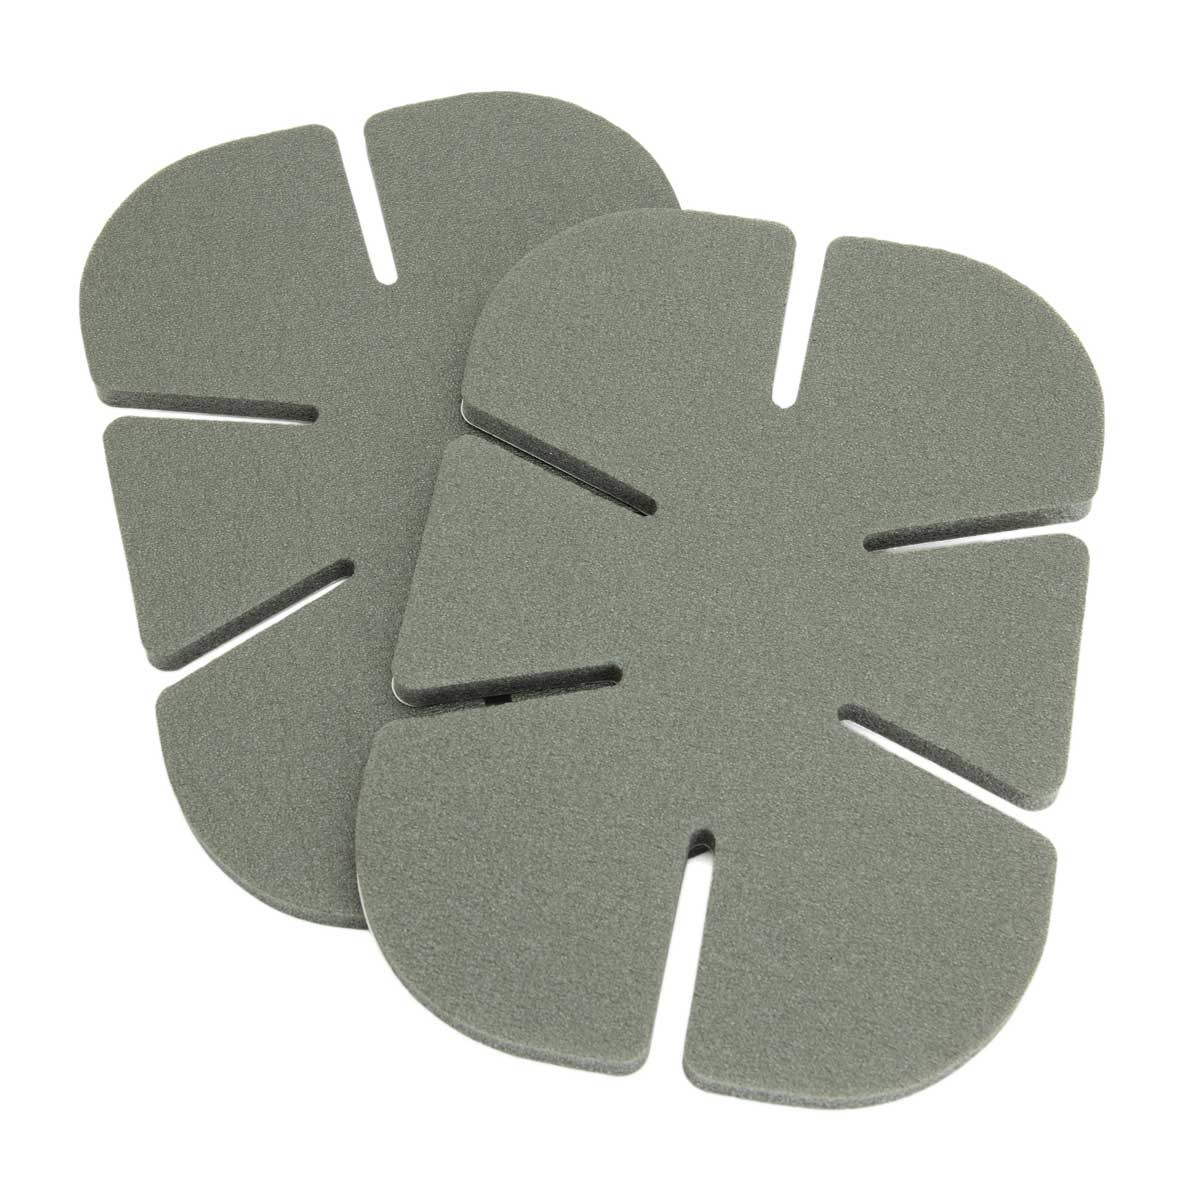 Soft Knees Disposable Knee Pads